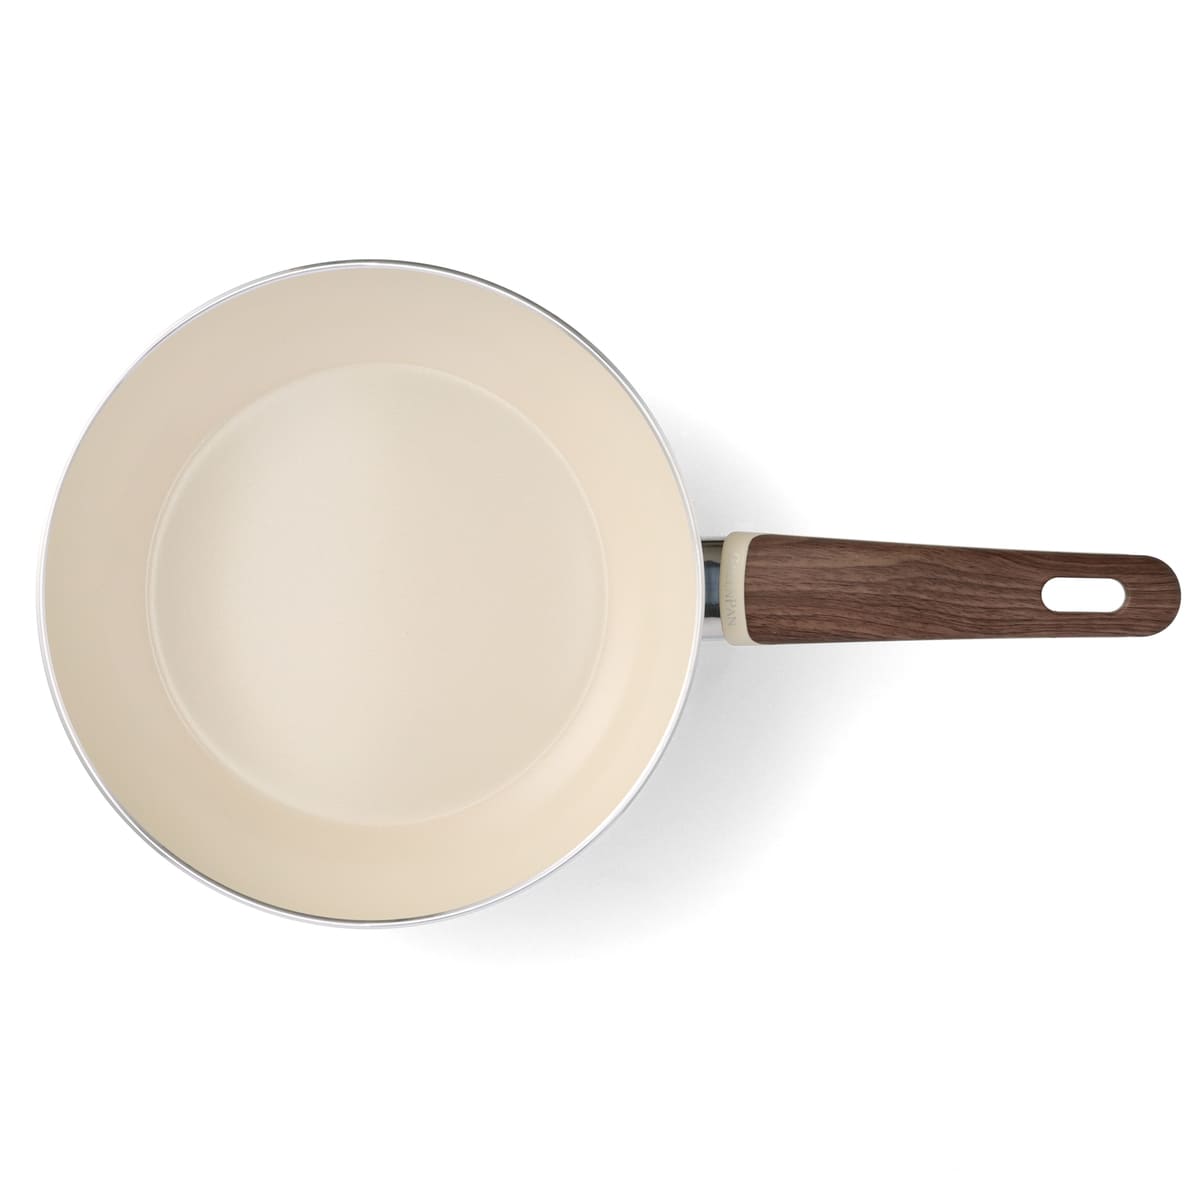 CC001009-001 - Wood-Be frying pan, cream white - 20cm - Product Image 1